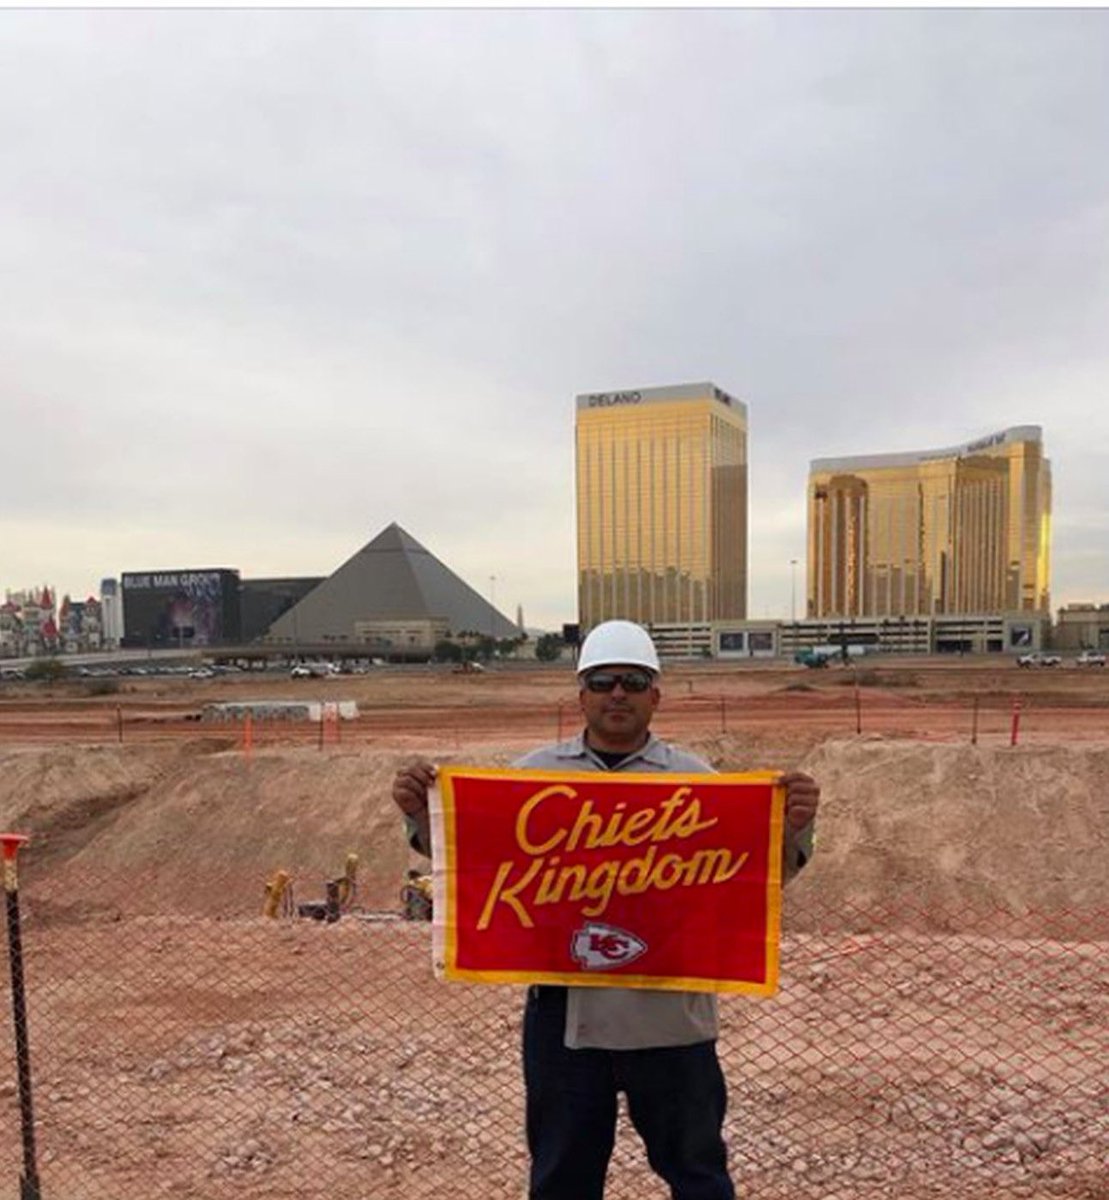 A reminder that in 2017, a Chiefs flag was buried near what was expected to be the 50-yard line of Allegiant Stadium in Vegas, host of #SBLVIII. The post was captioned “Flag buried in dirt, encased in concrete, with a stadium built on top of it. Chiefs 1, Raiders 0. Las Vegas.”